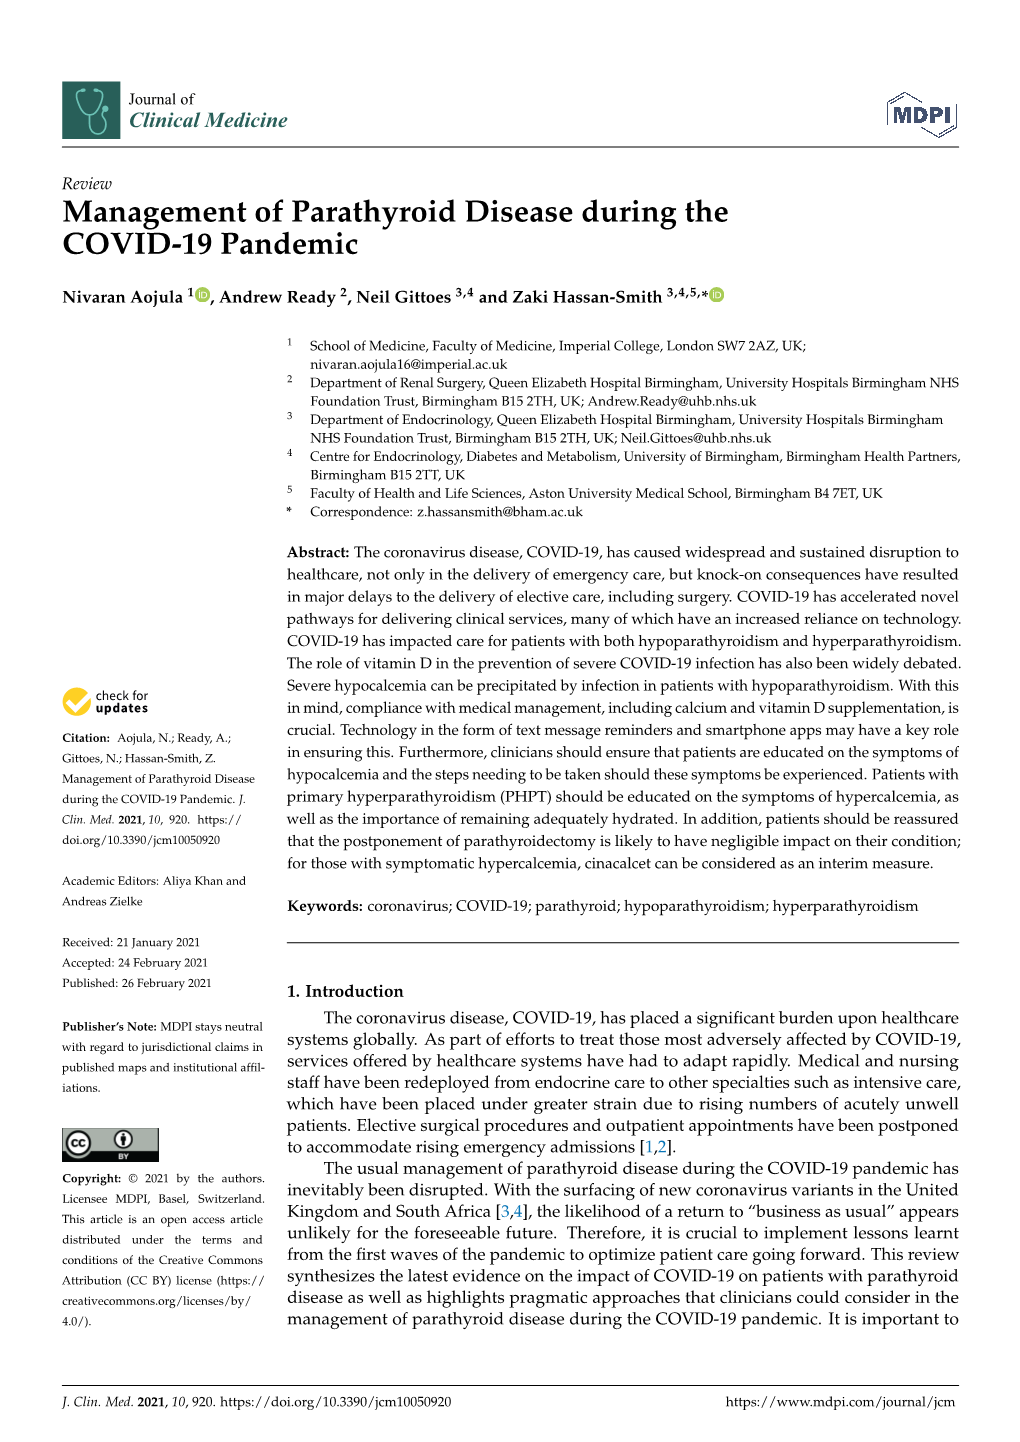 Management of Parathyroid Disease During the COVID-19 Pandemic